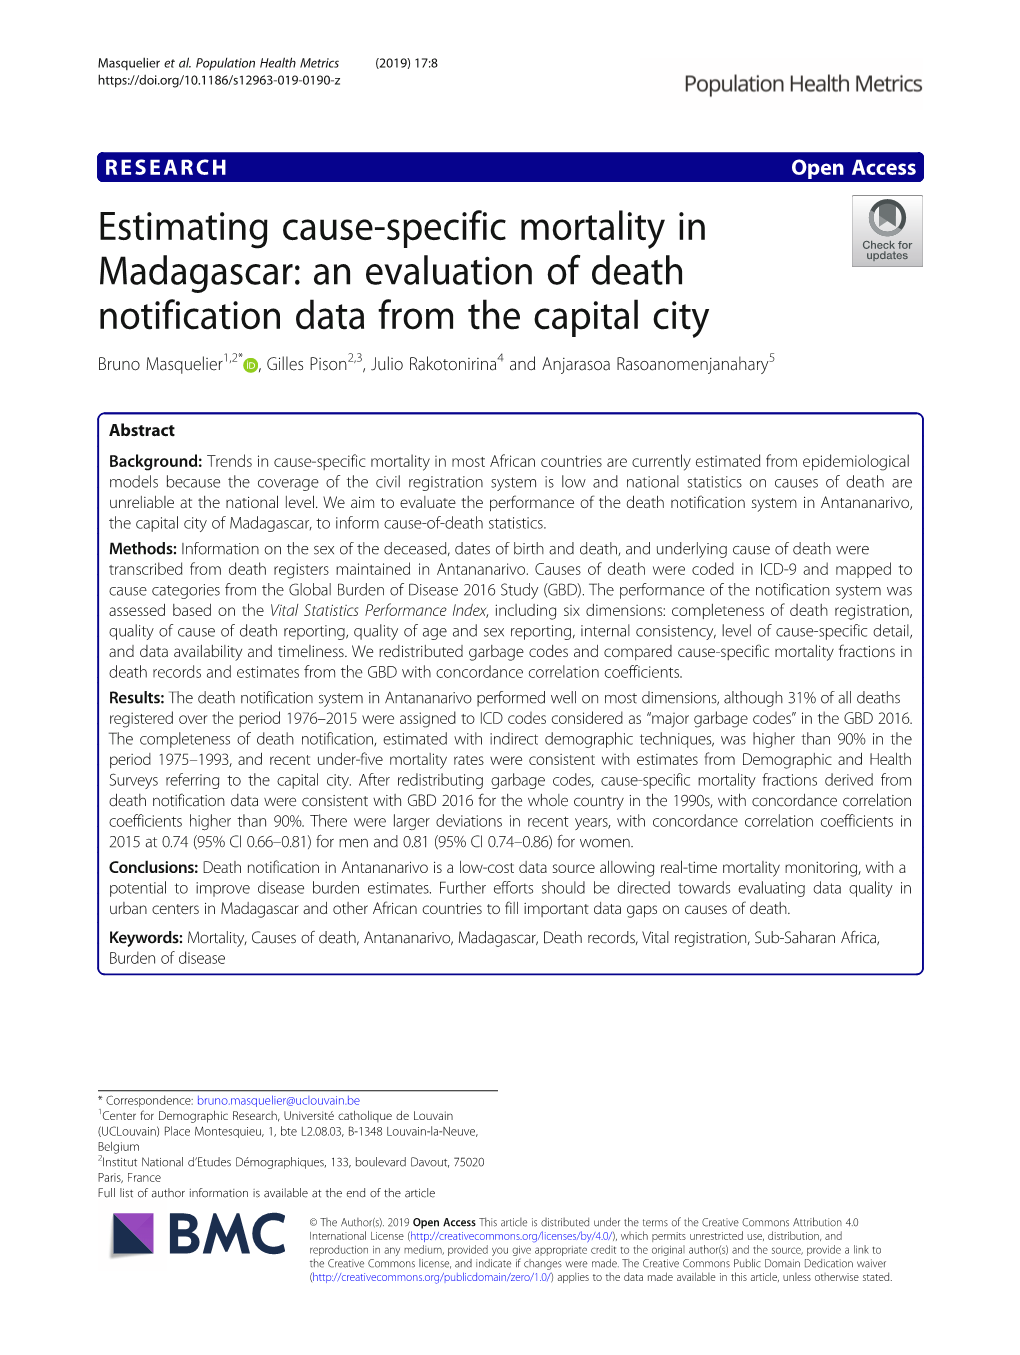 Estimating Cause-Specific Mortality in Madagascar: an Evaluation of Death